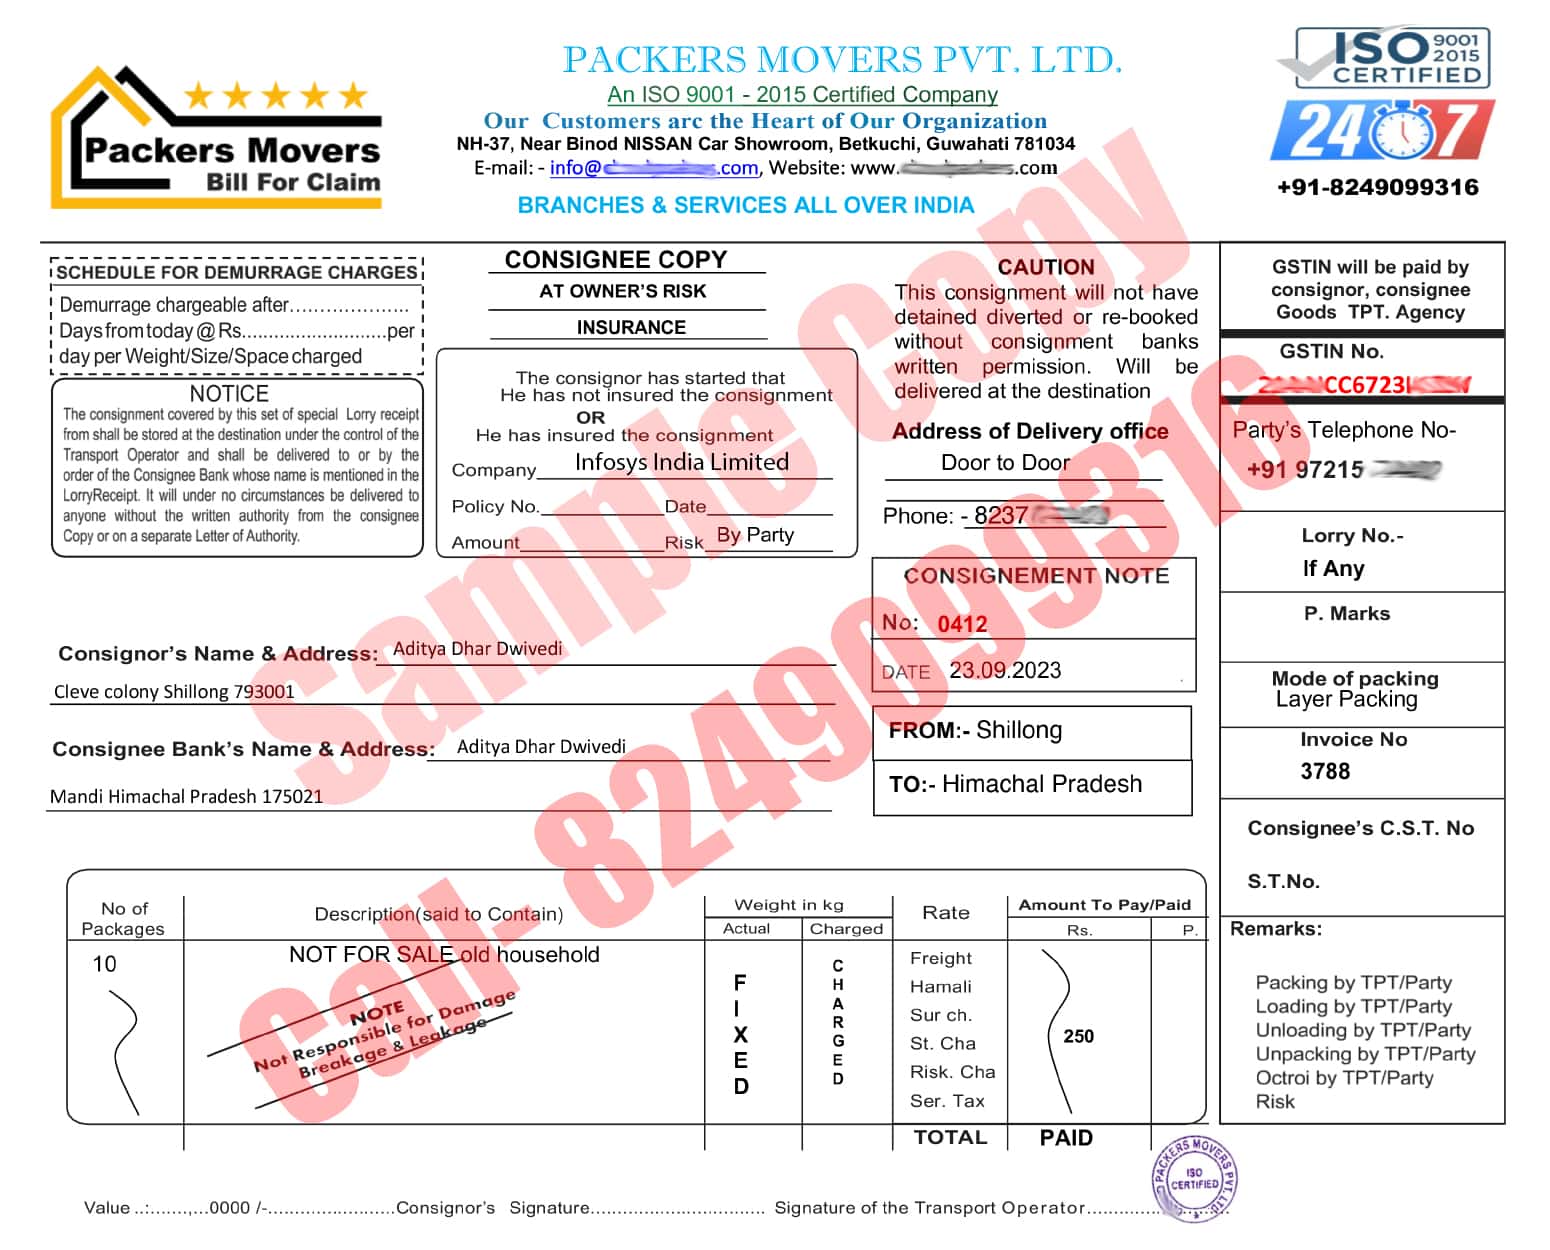 Consignee copy of Packers and Movers Bill for Claim